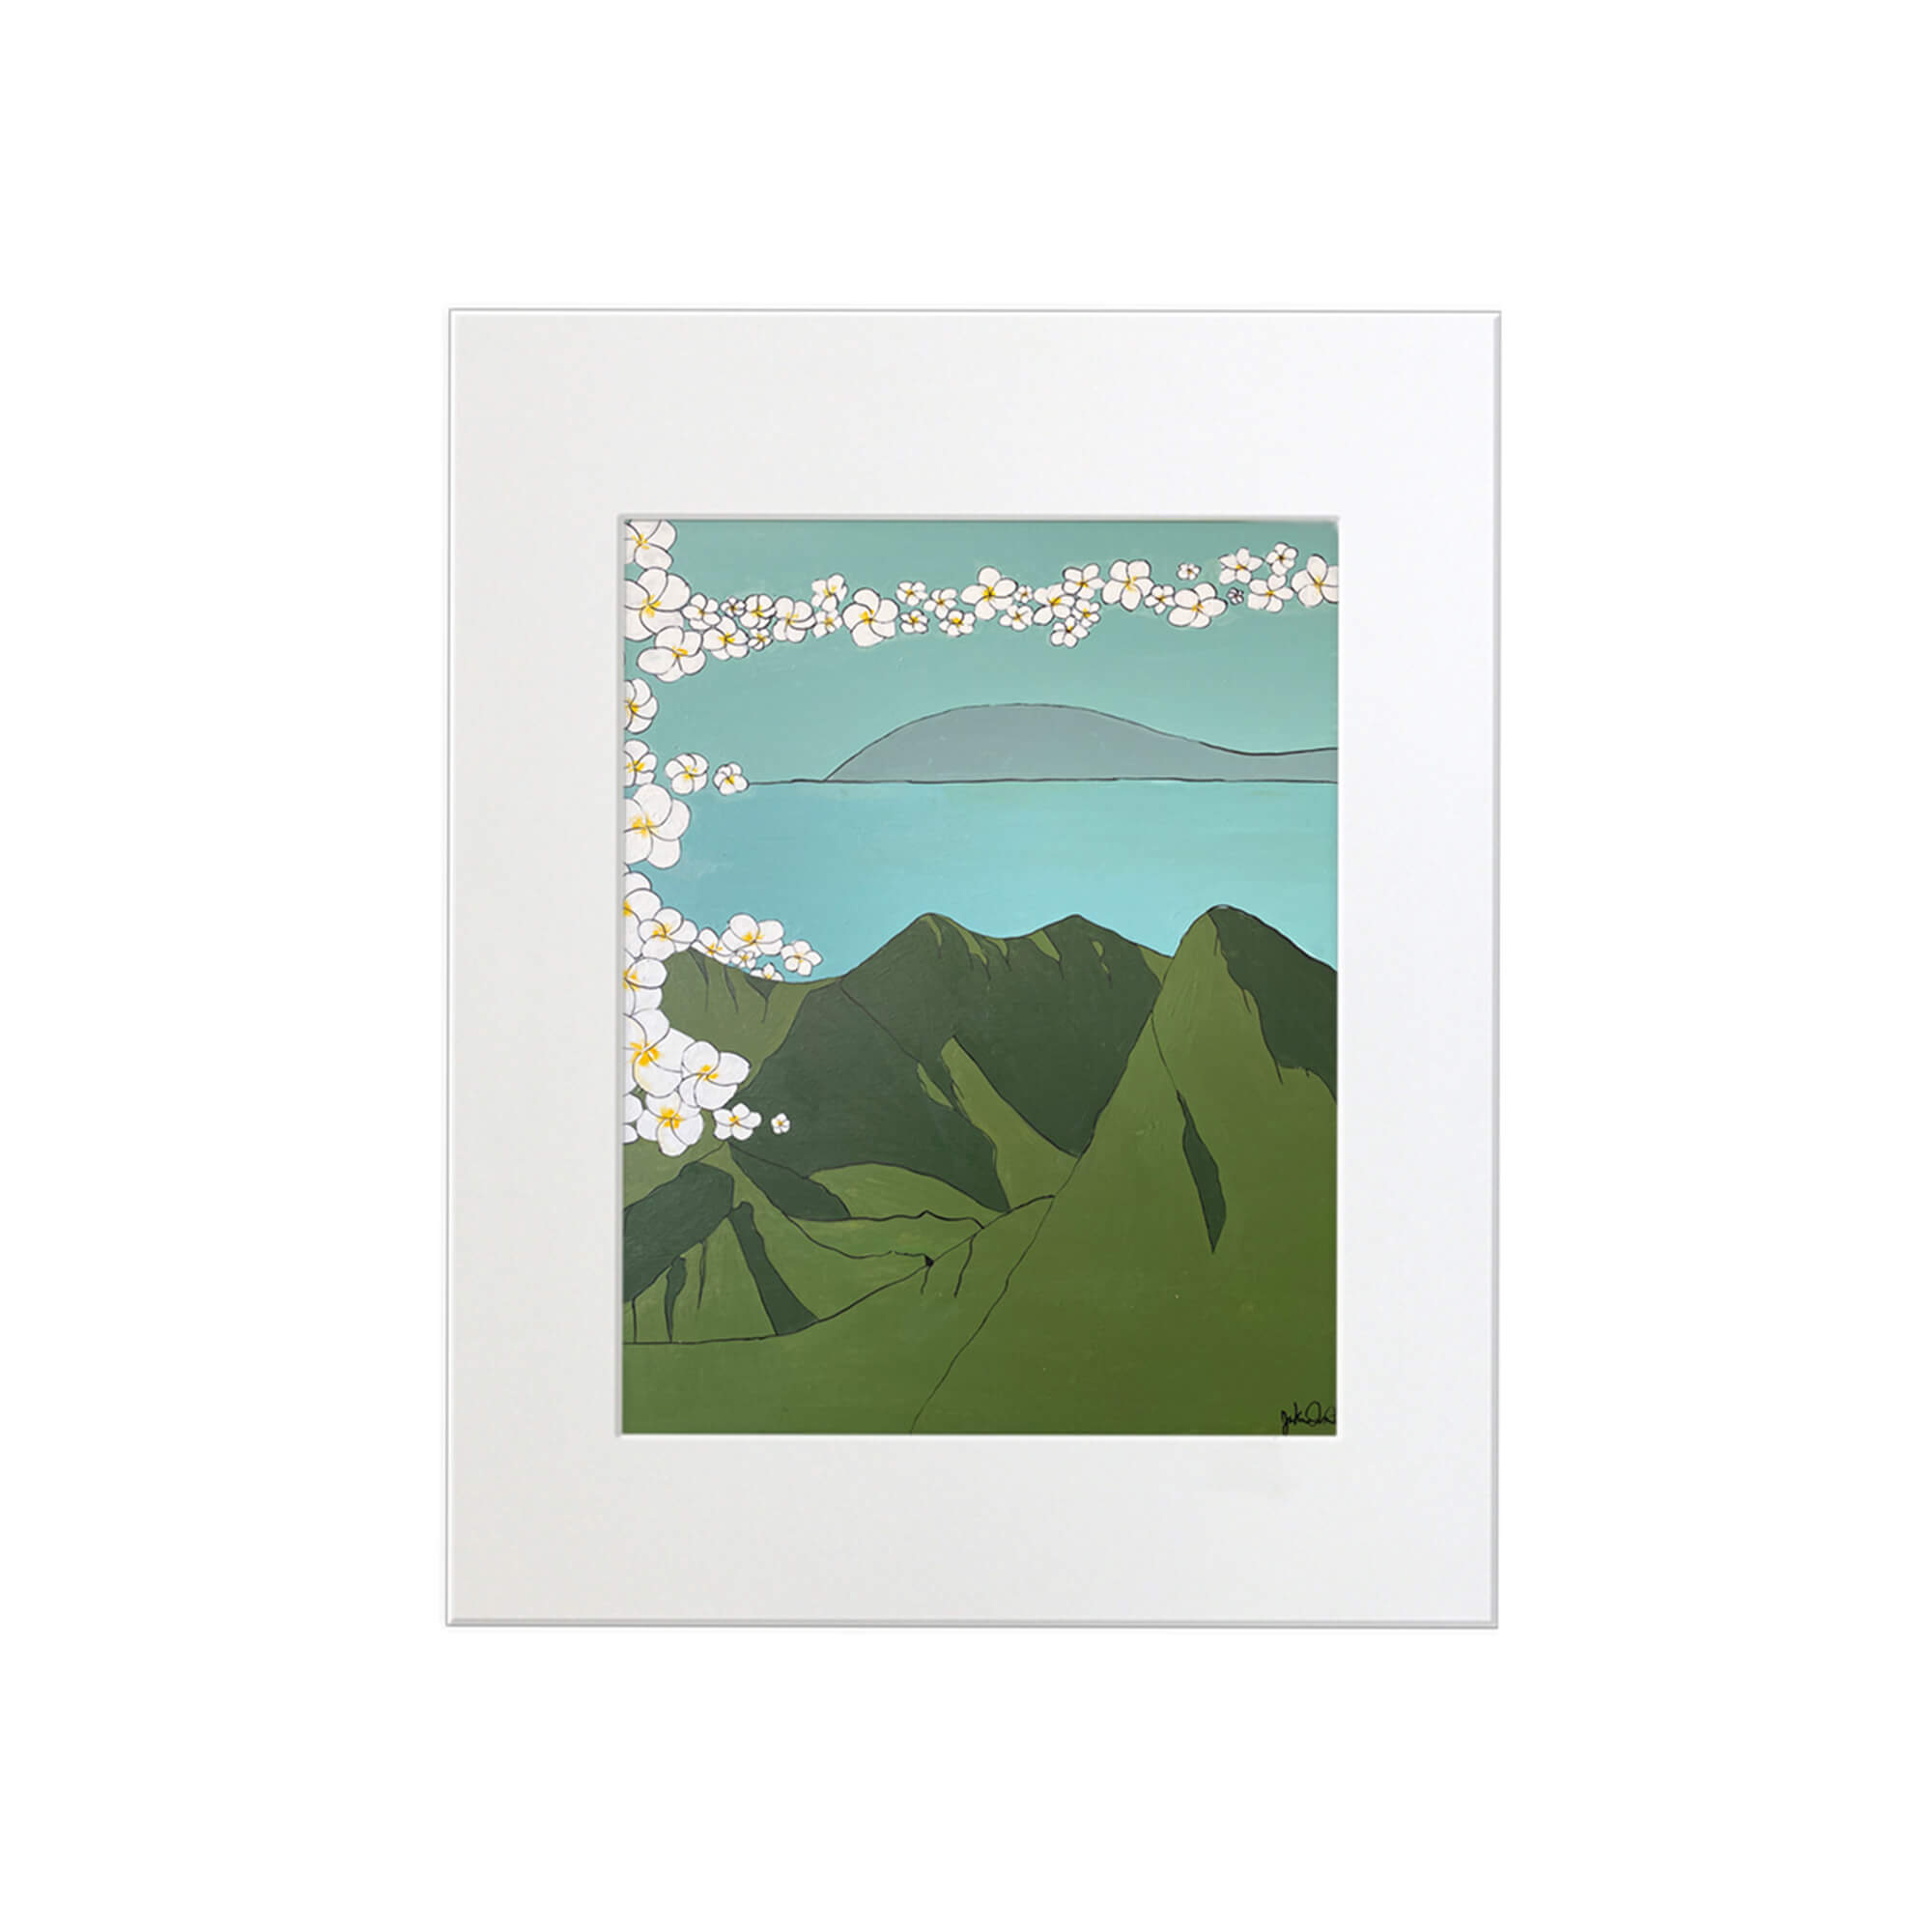 A matted art print featuring the beautiful mountains of Hawaii with plumeria flowers by Hawaii artist Jackie Eitel